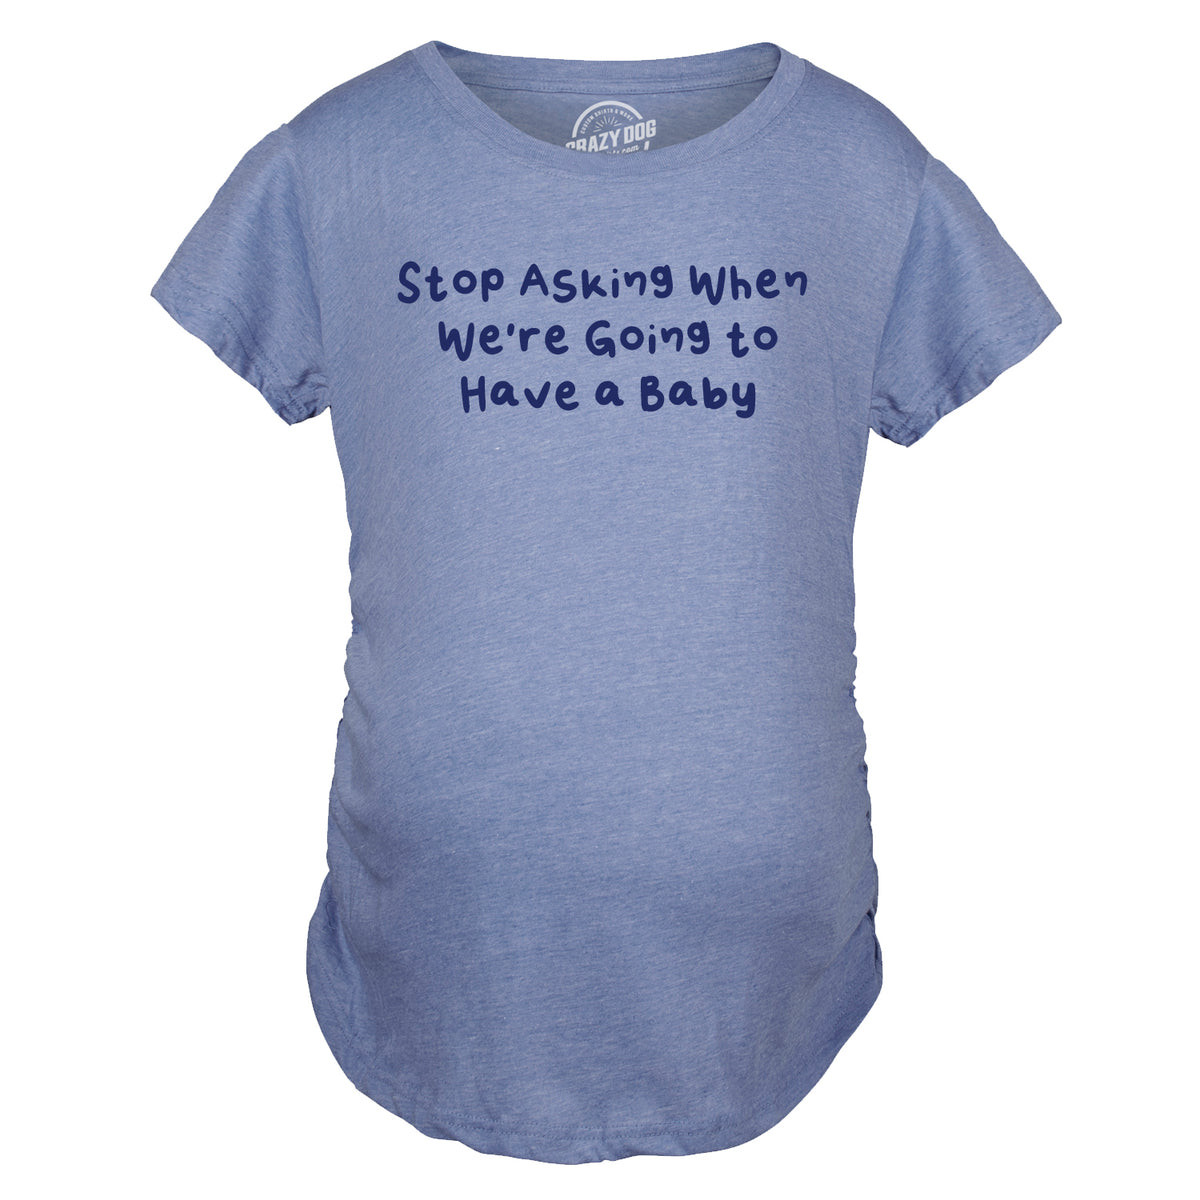 Funny Light Heather Blue - ASKING Stop Asking When Were Going To Have A Baby Maternity T Shirt Nerdy Sarcastic Tee